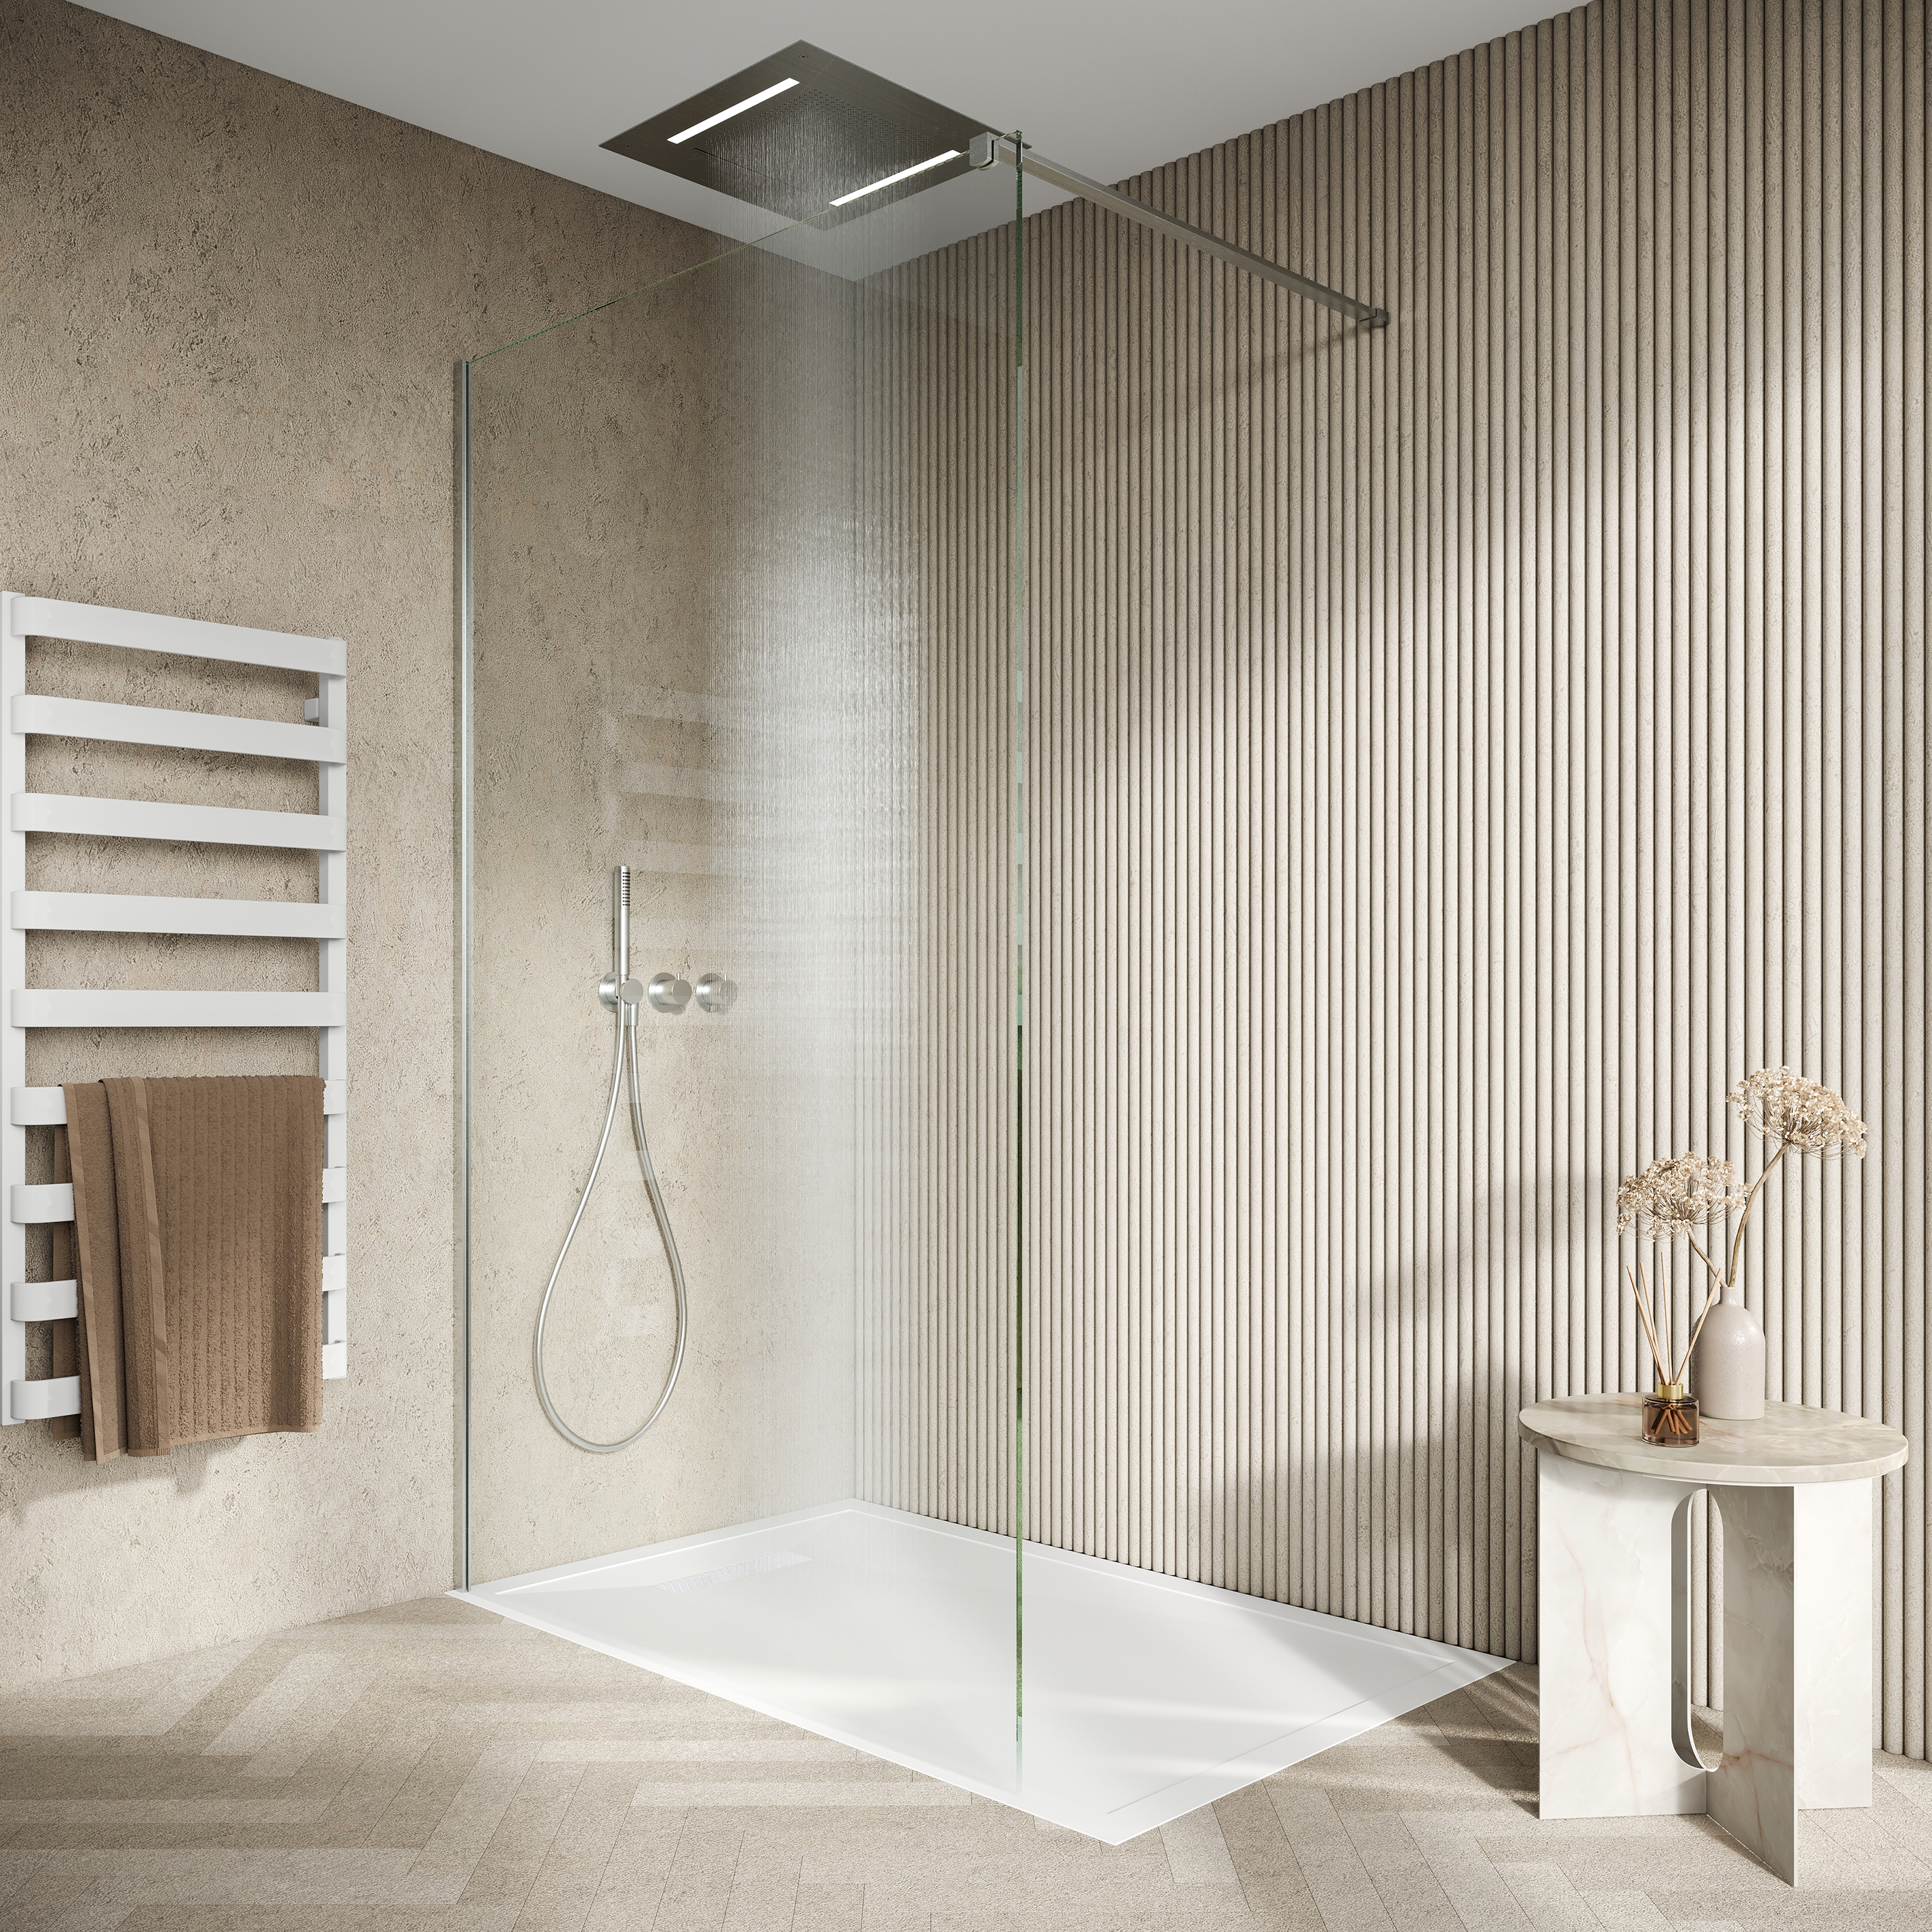 Creo and Vito engineered stone shower trays bringing innovation and creativity to your shower.